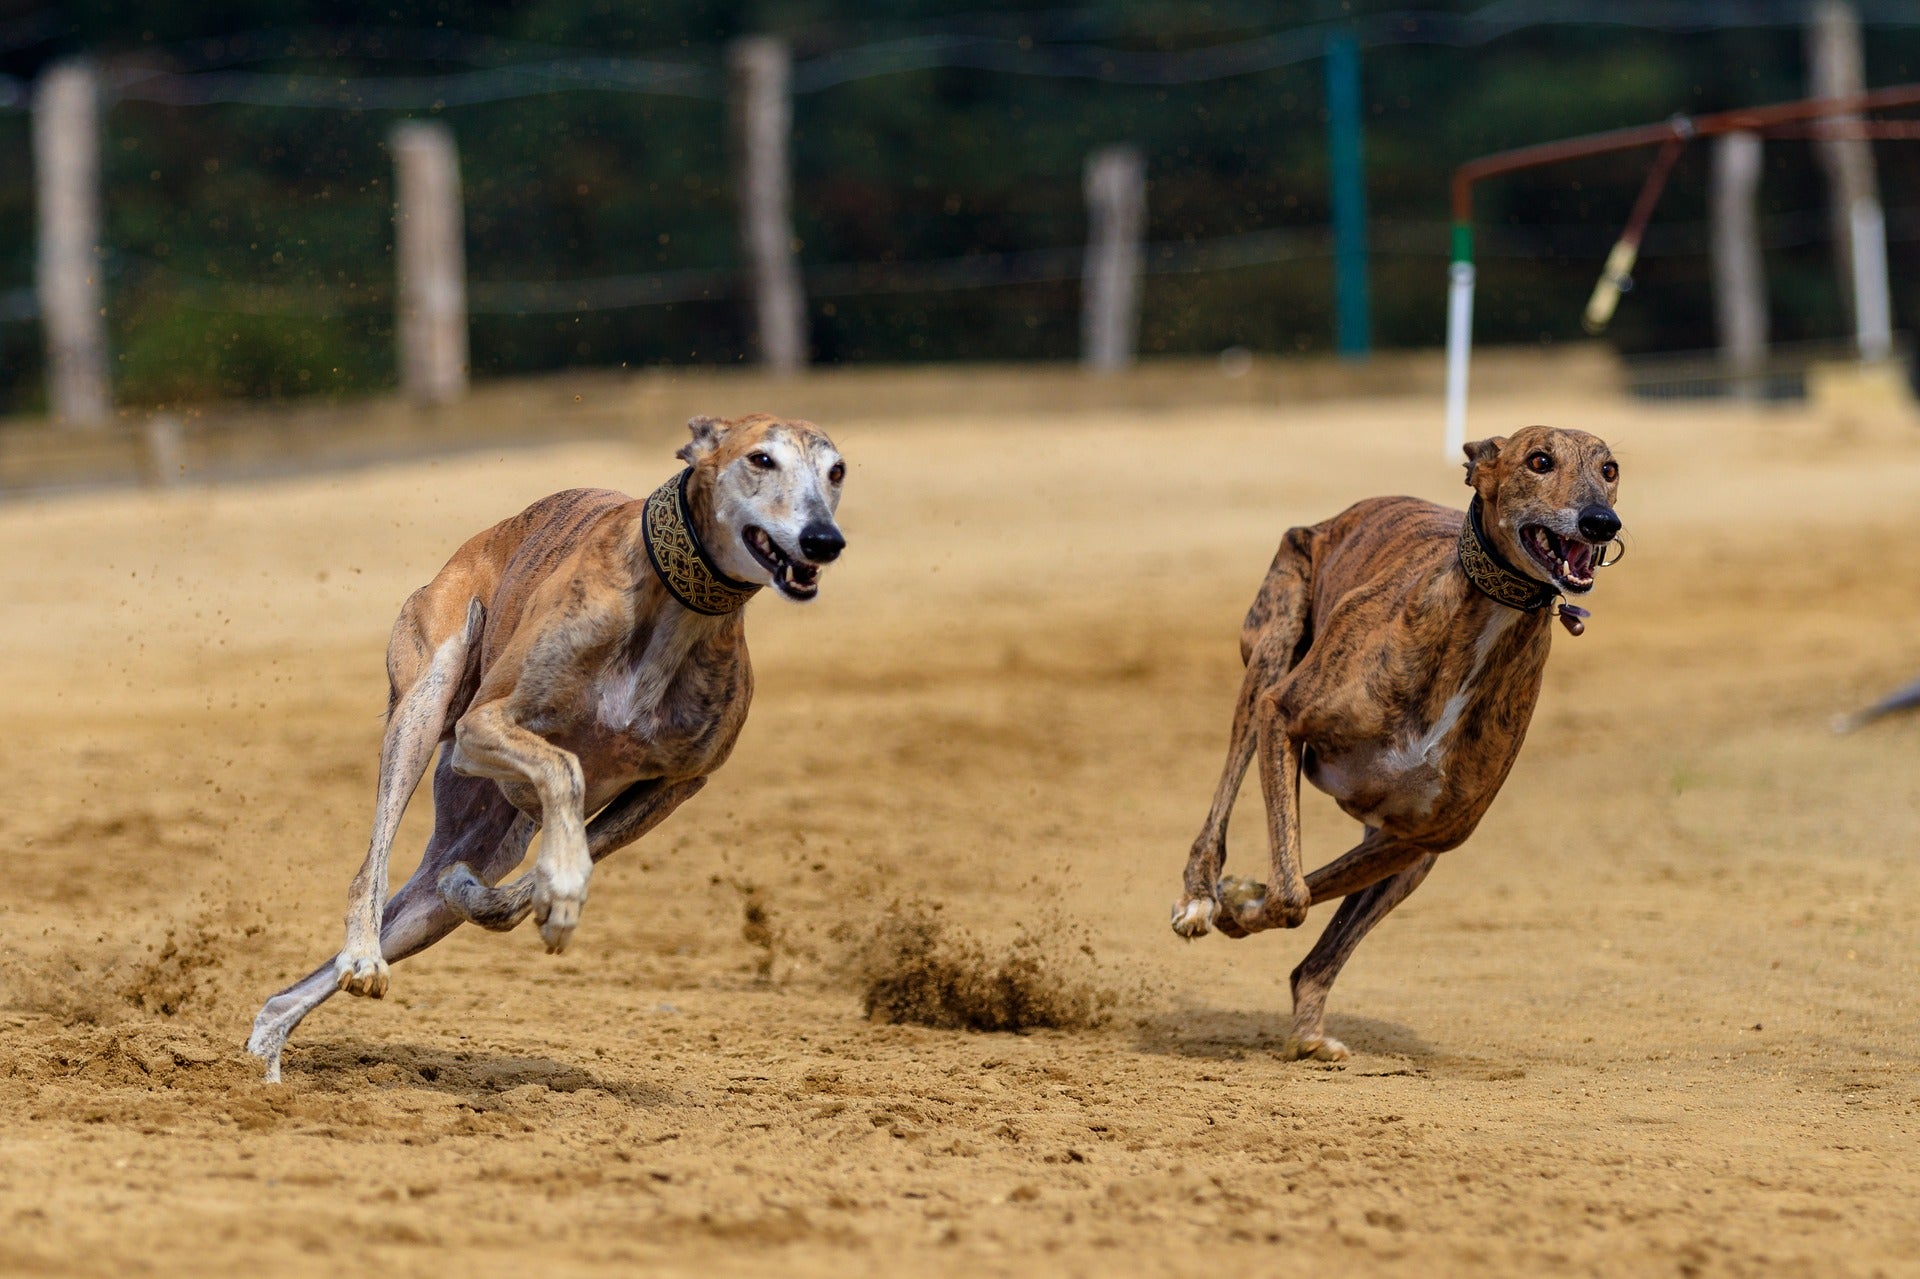 are greyhounds good pets